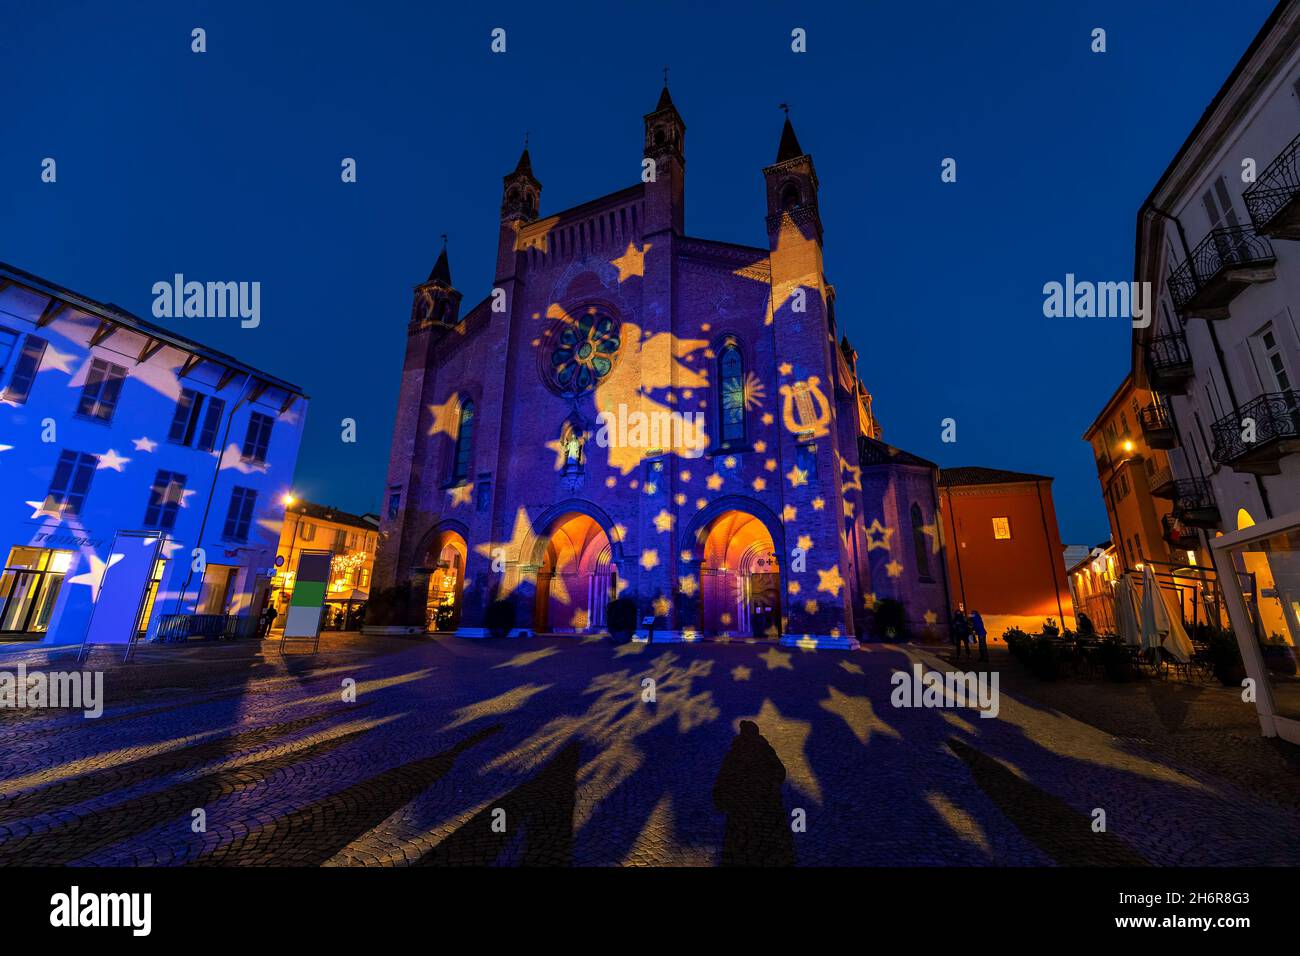 San Lorenzo cathedral illuminated for Christmas holidays in the evening on cobblestone square in old town of Alba, Piedmont, Northern Italy. Stock Photo